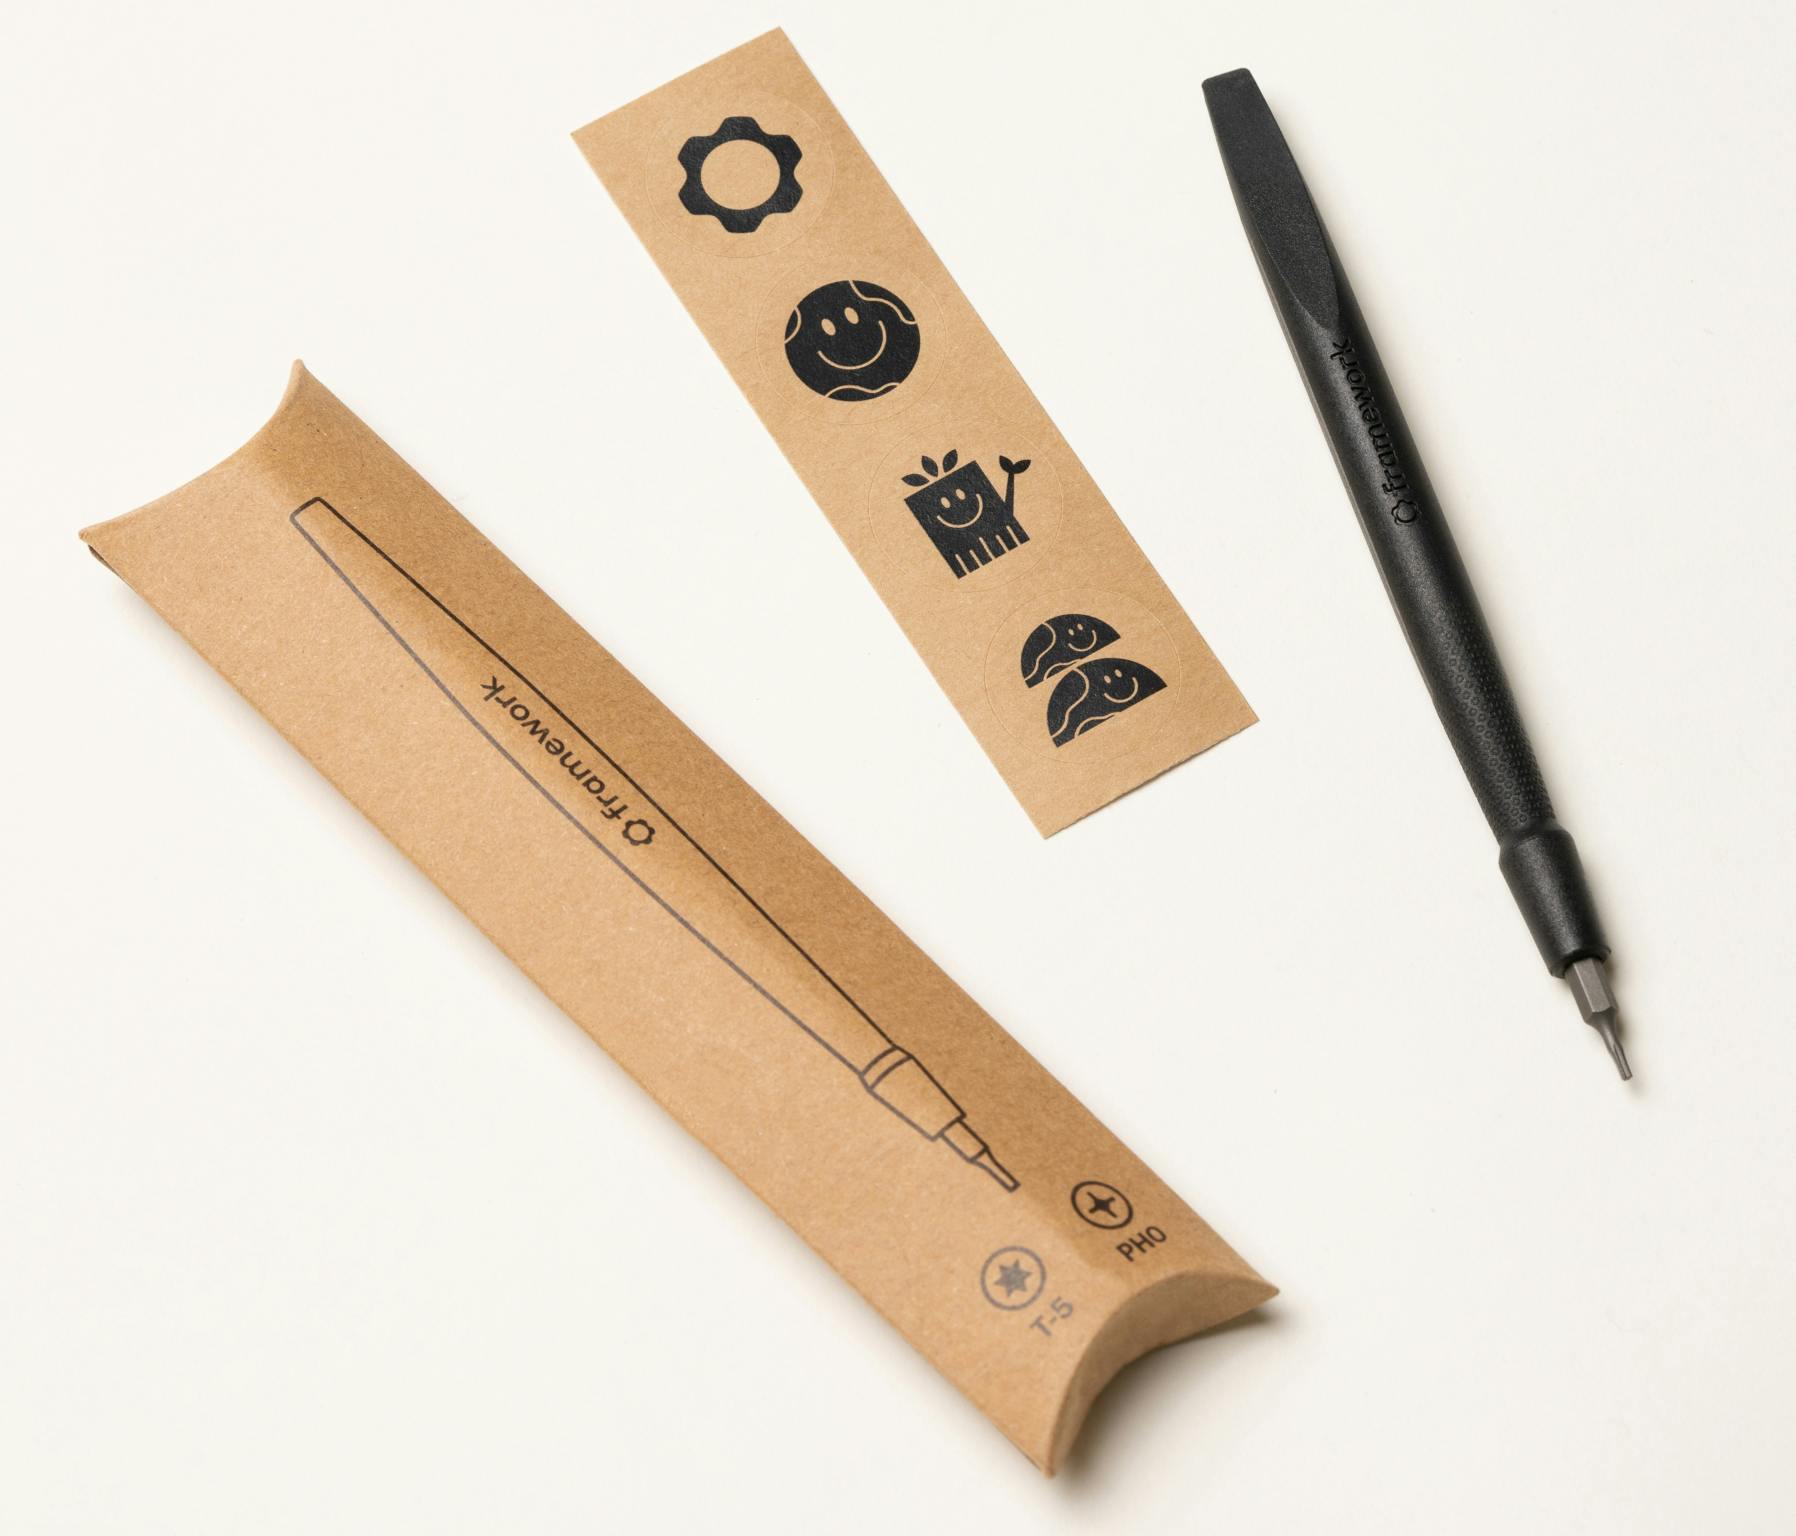 Framework screwdriver with packaging and sticker sheet